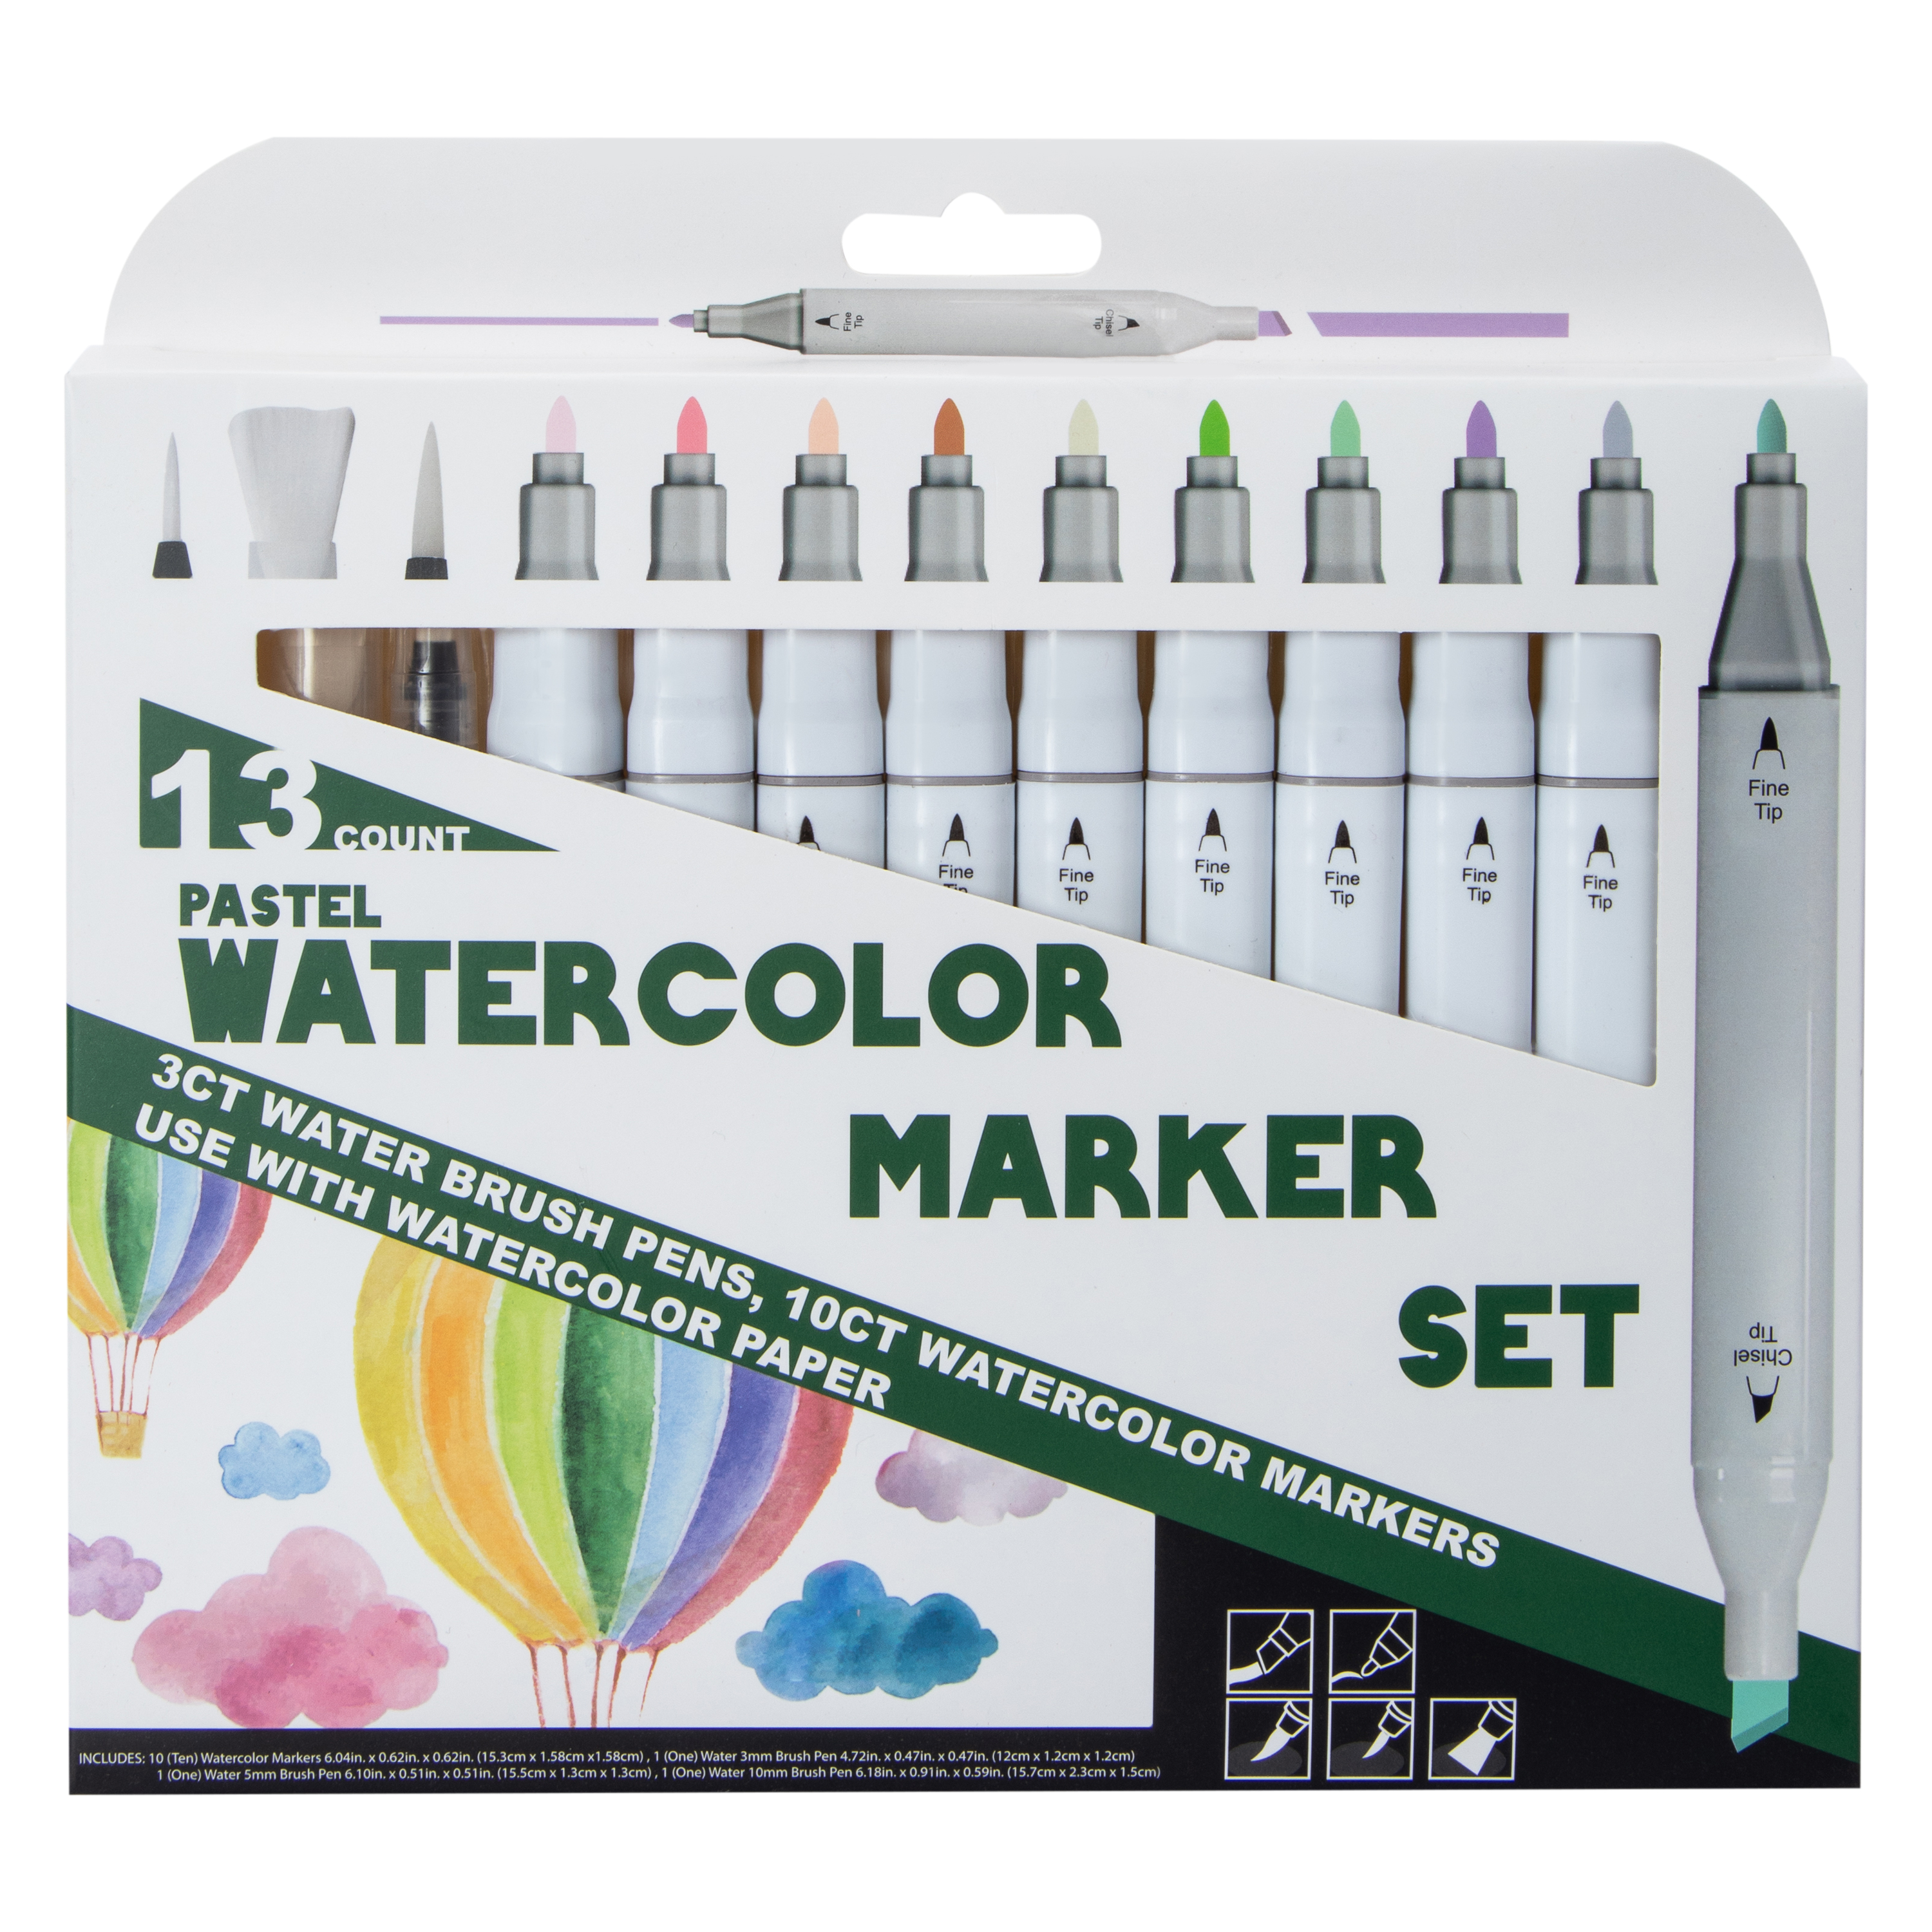 dual-tip watercolor marker drawing set 13-count